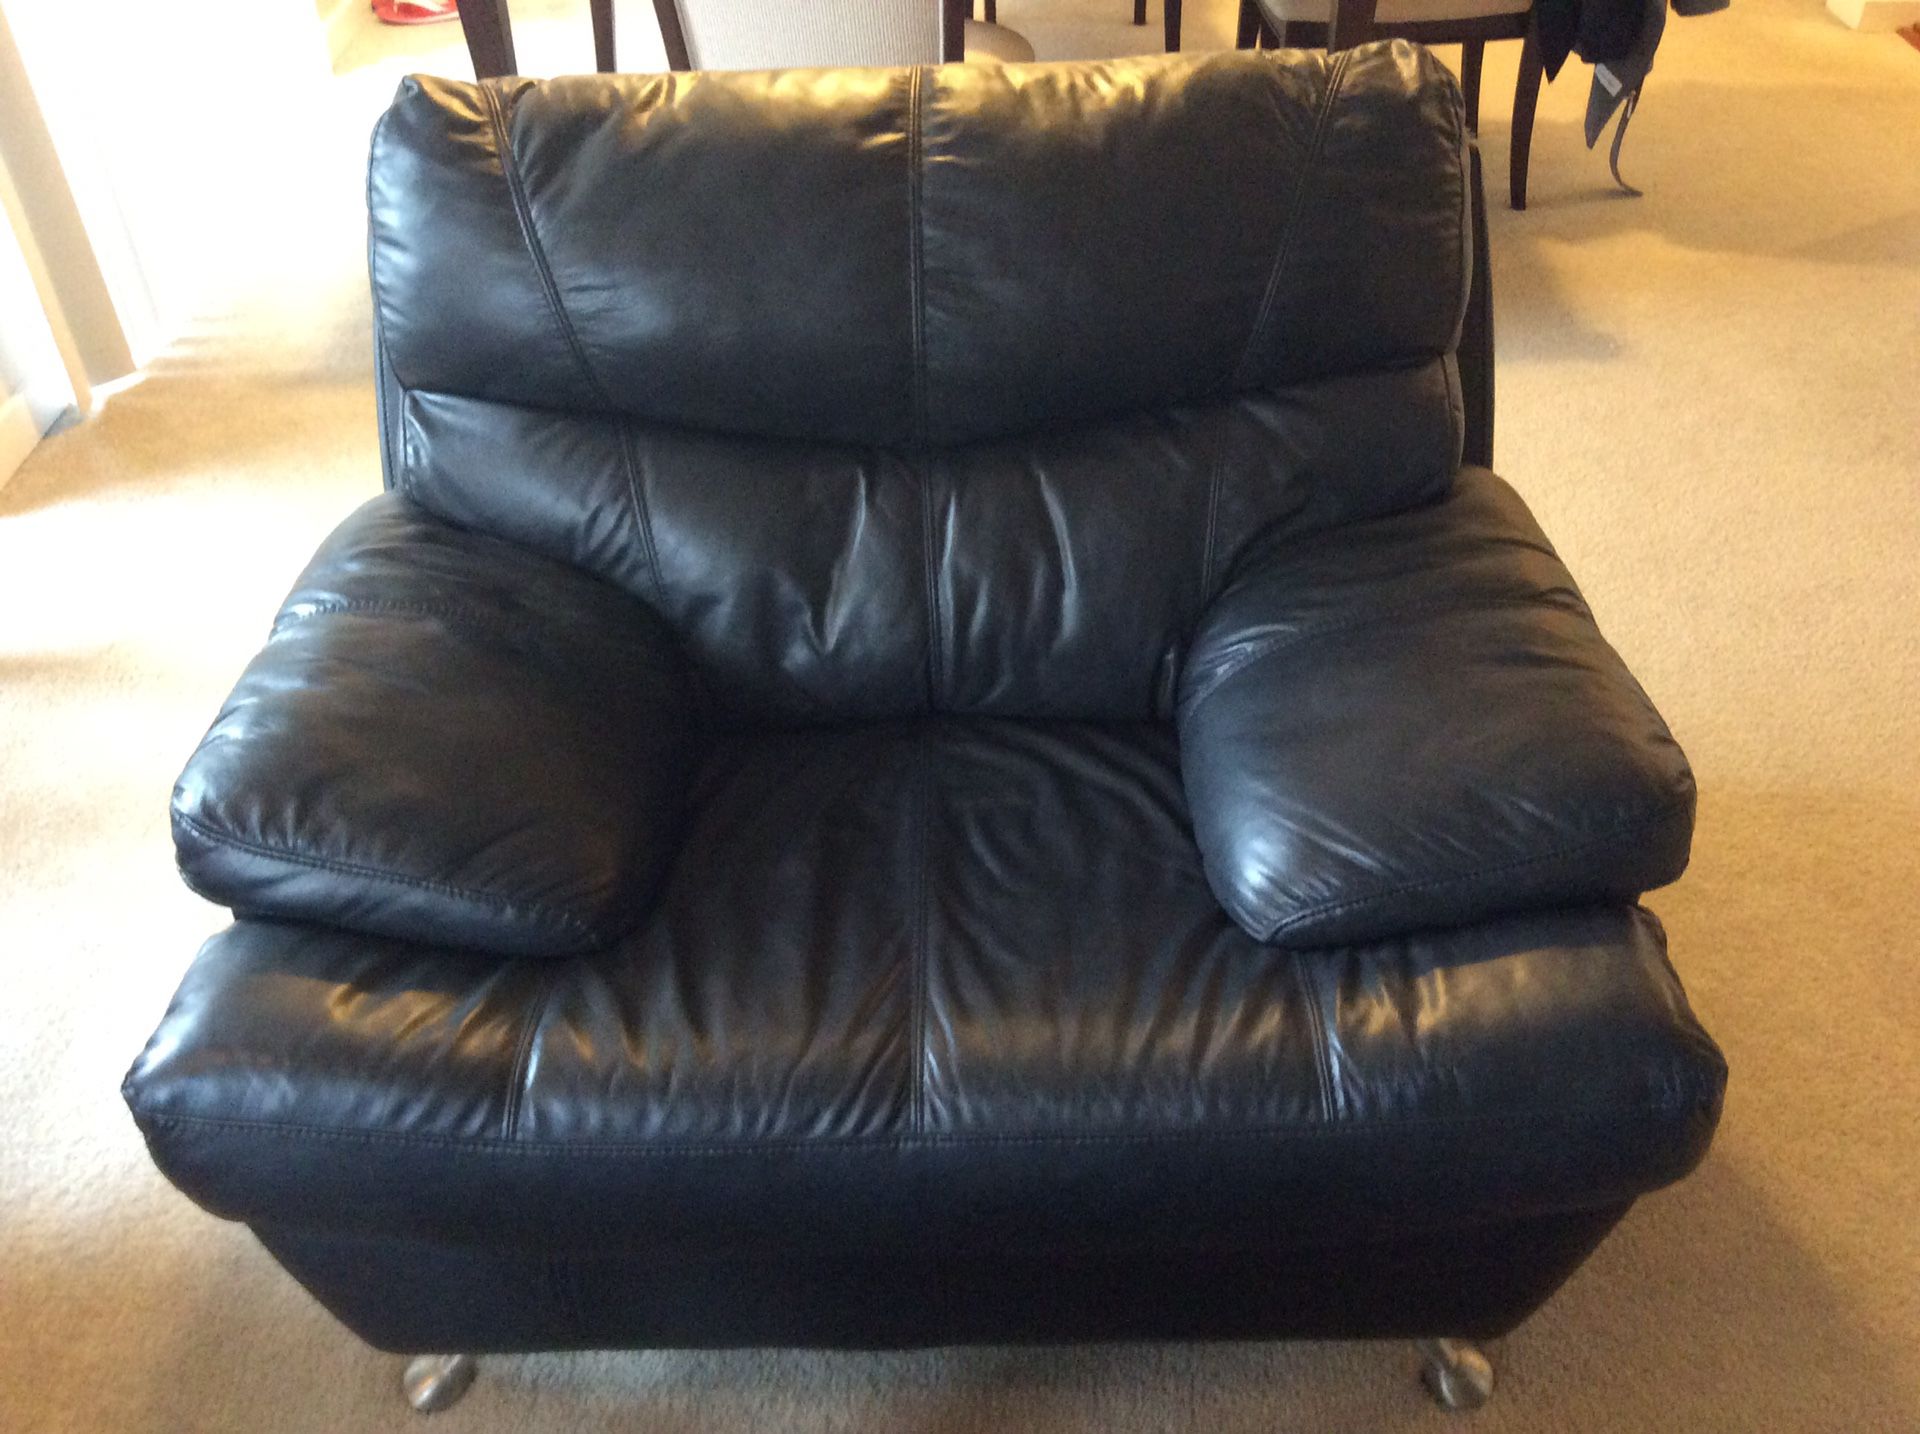 Palliser Sofa, Love Seat and Chair set, high quality leather, great condition